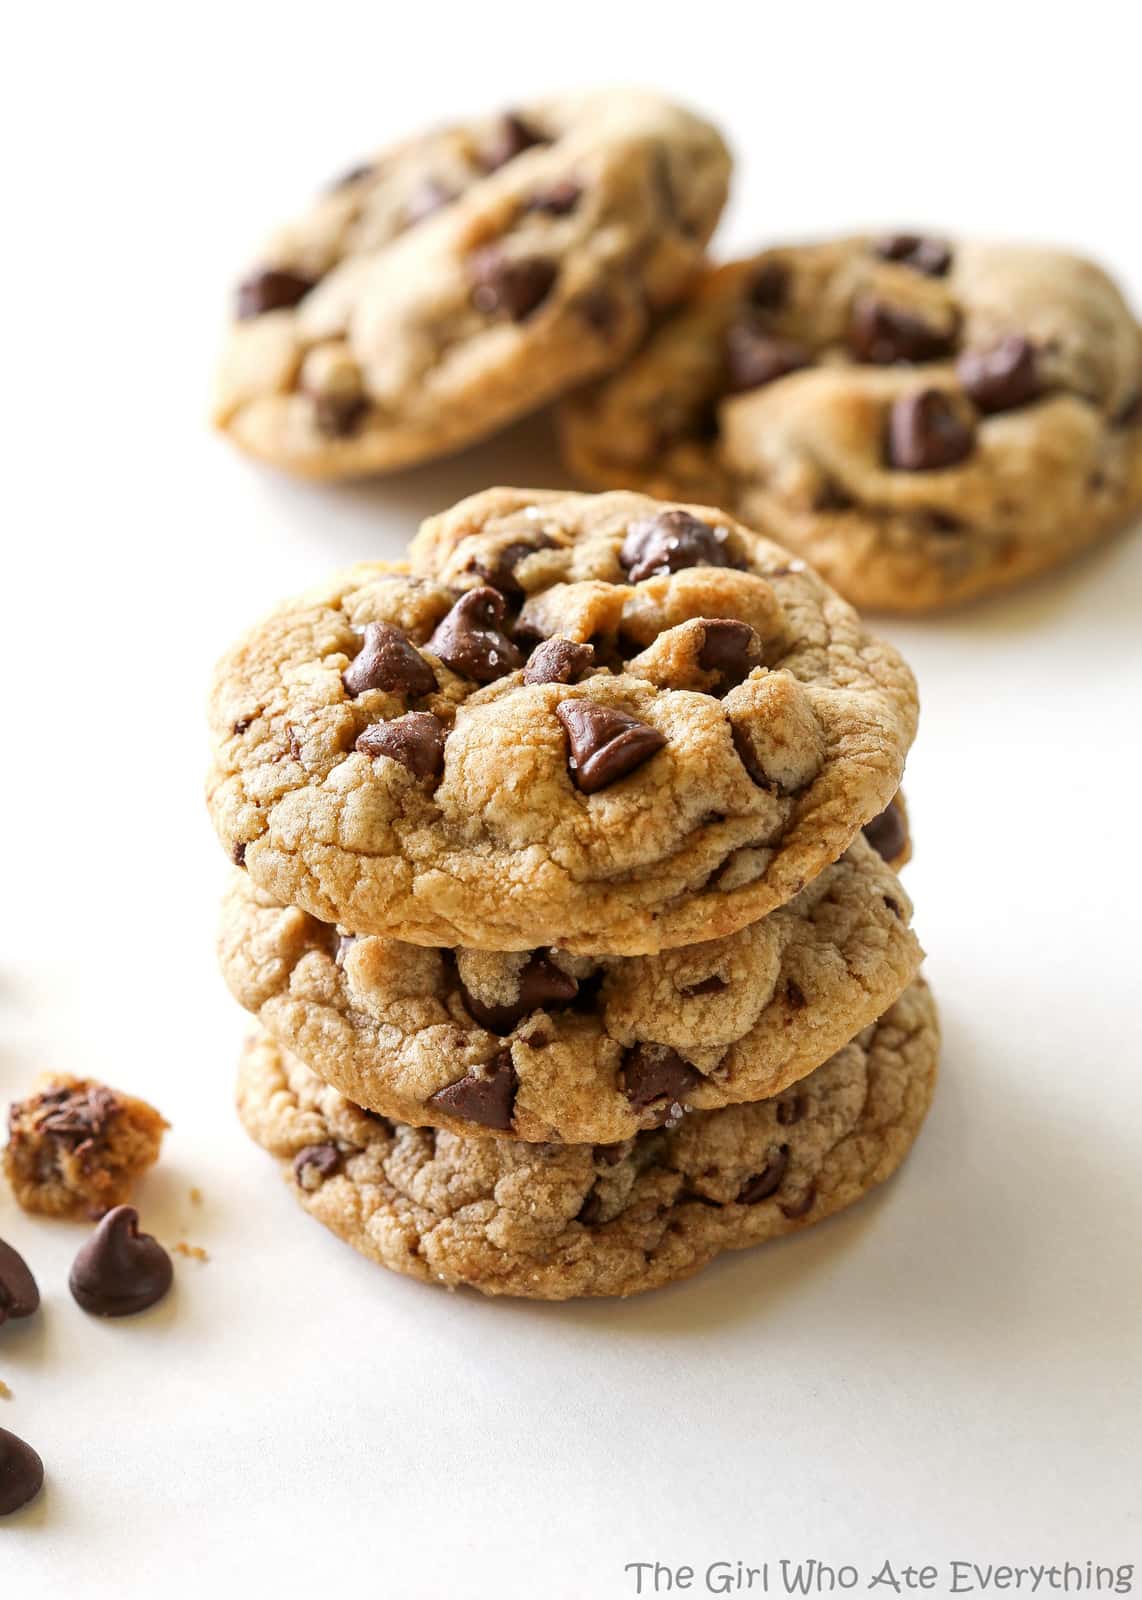 https://www.the-girl-who-ate-everything.com/wp-content/uploads/2016/04/browned-butter-chocolate-chip-cookies-003.jpg